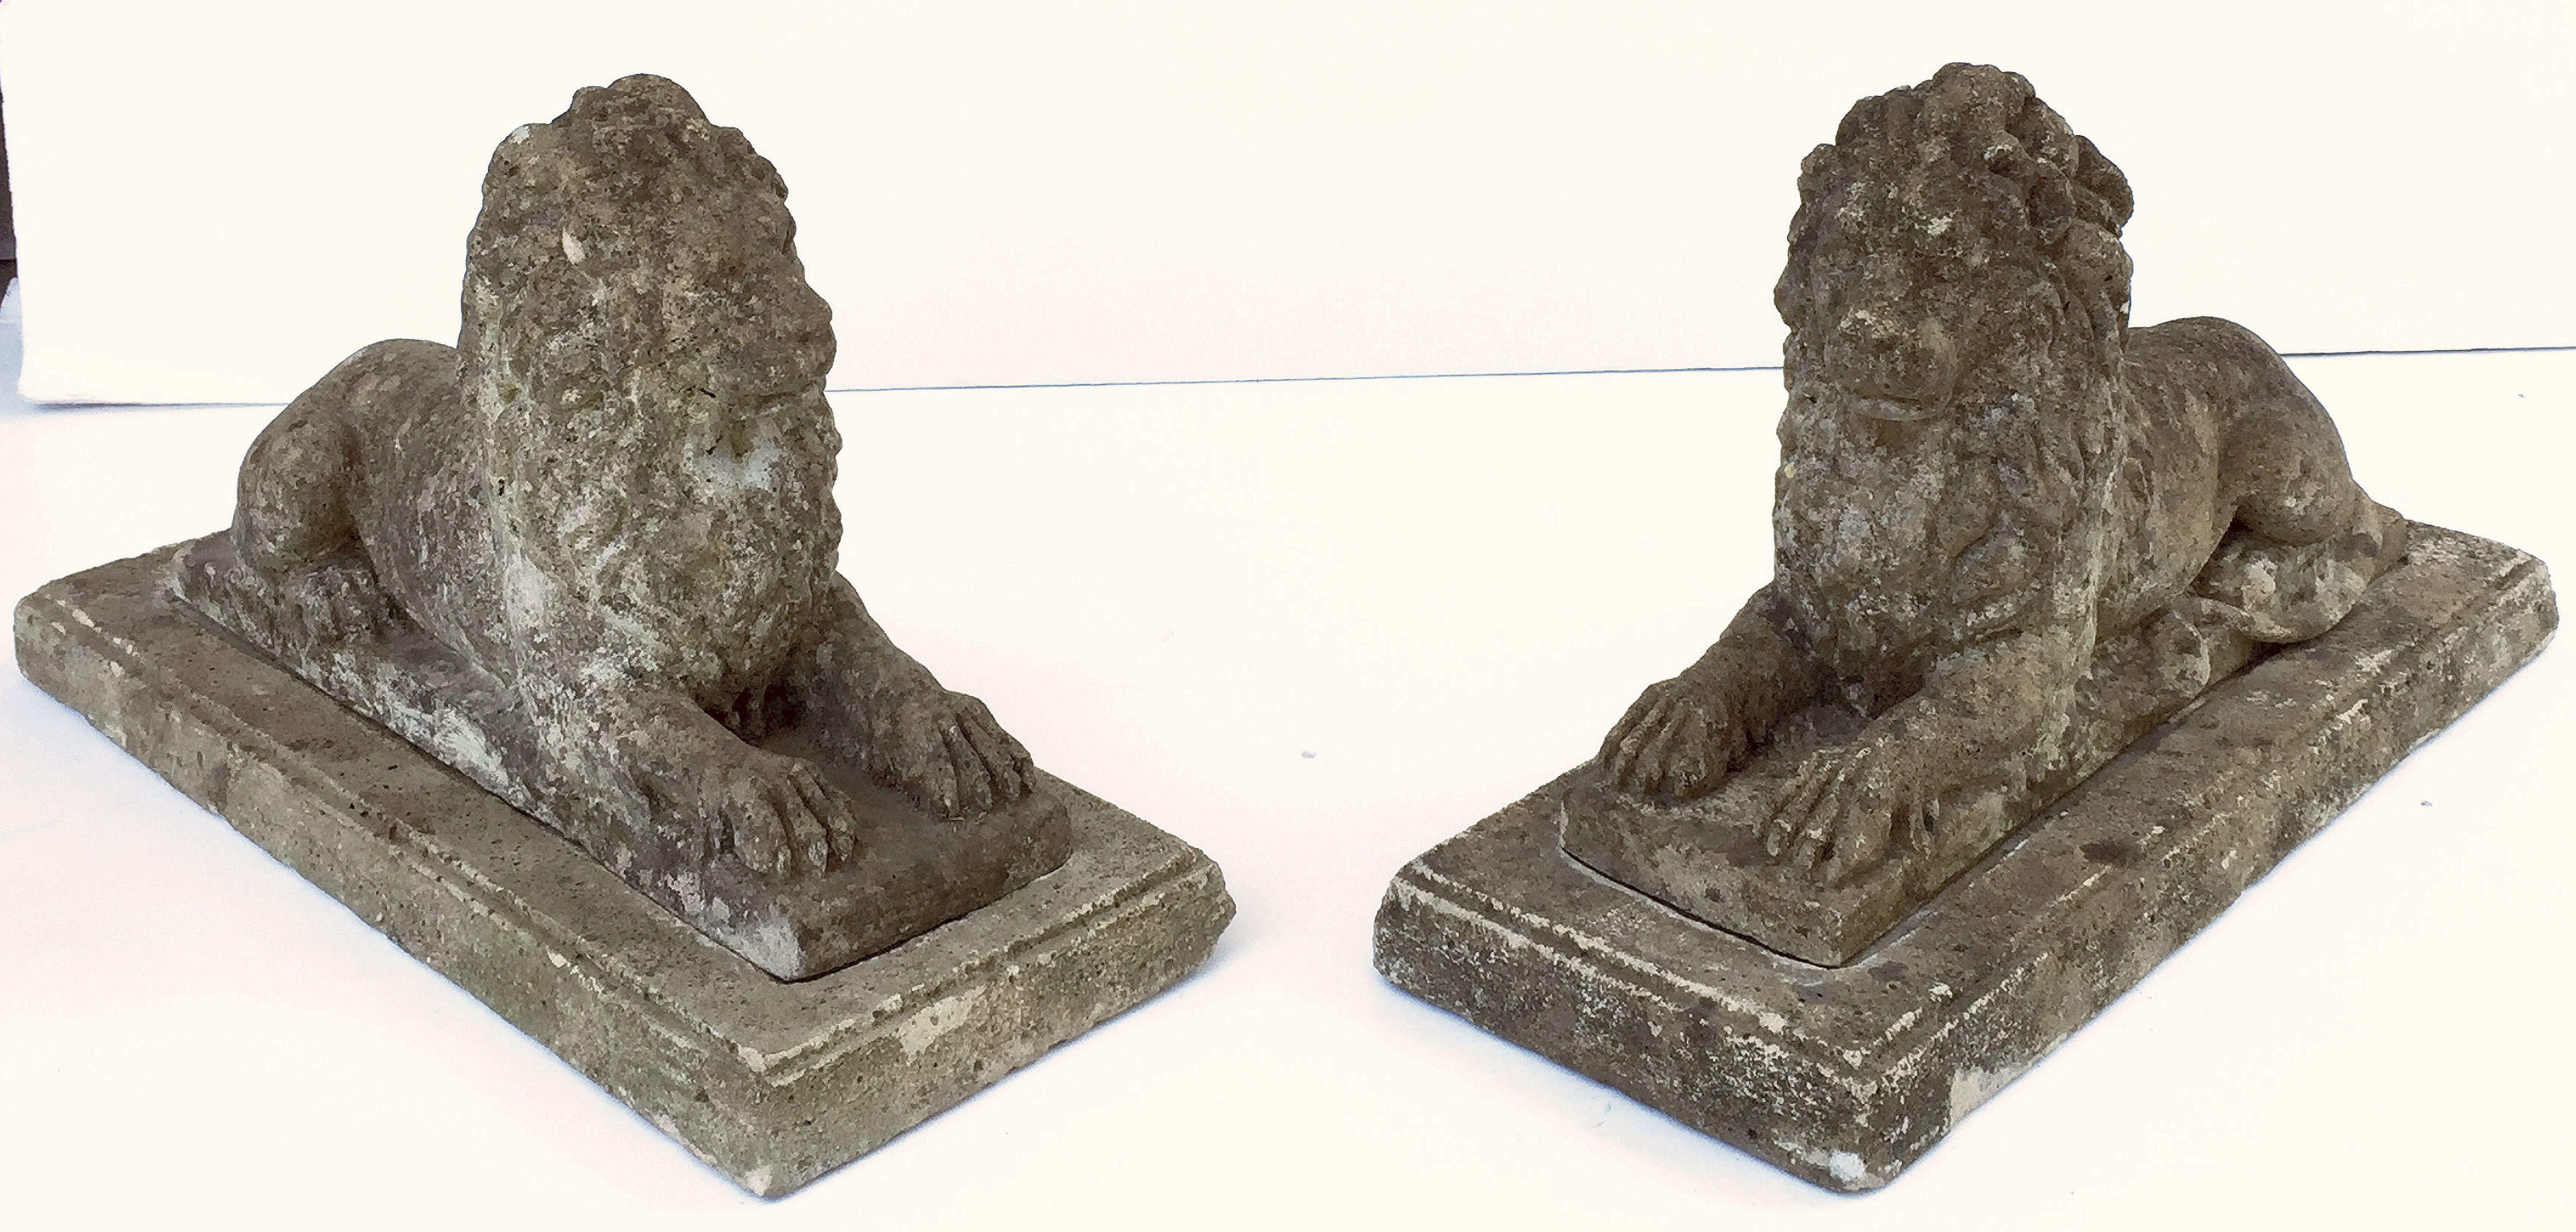 English Garden Stone Lions on Plinths 'Priced as a Pair' 1